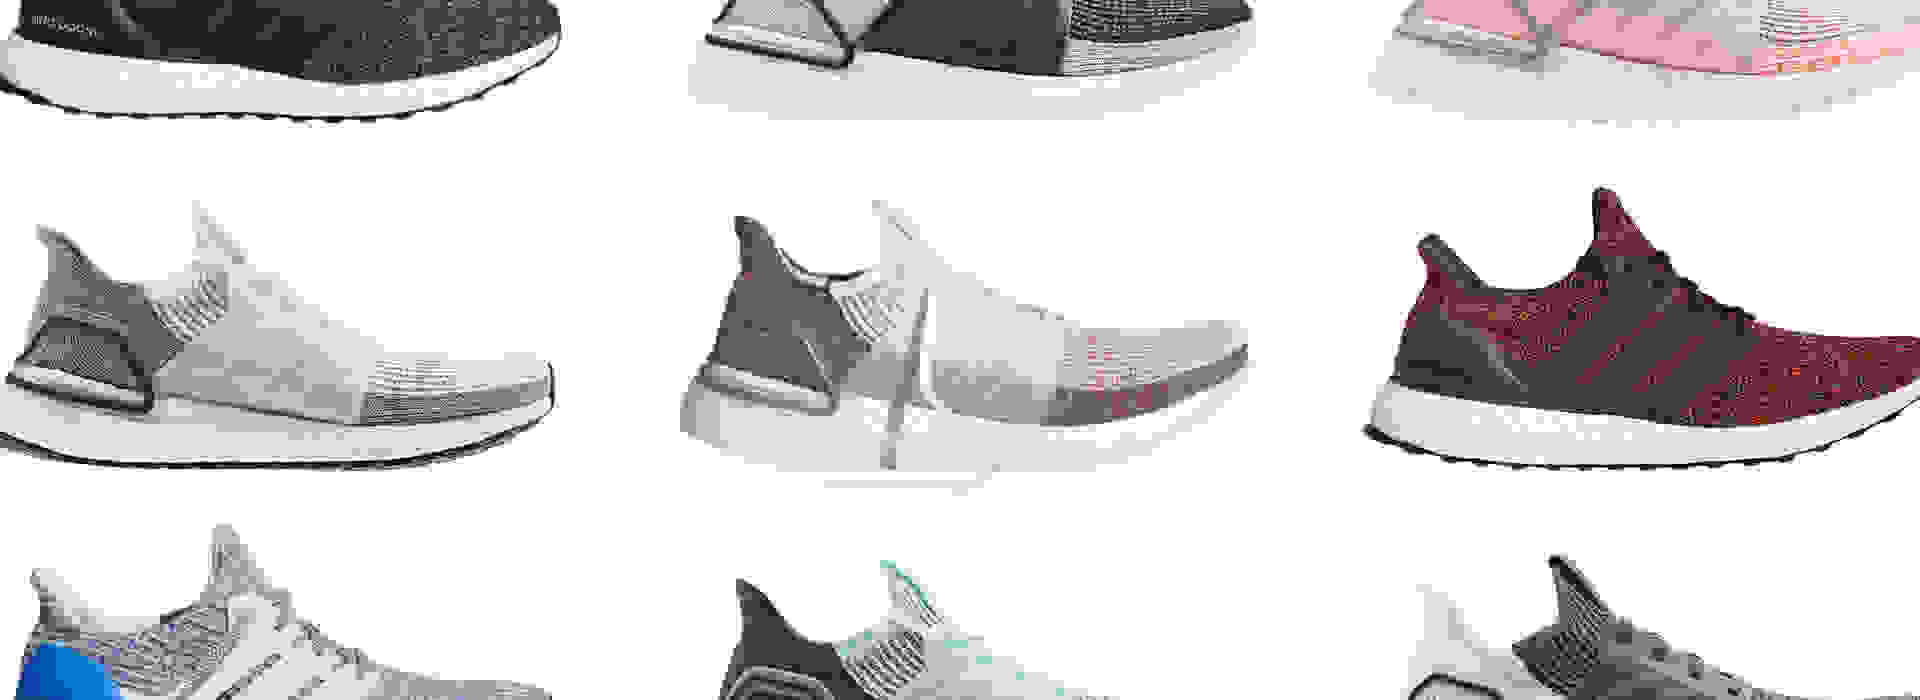 ultra boost 19 size guide